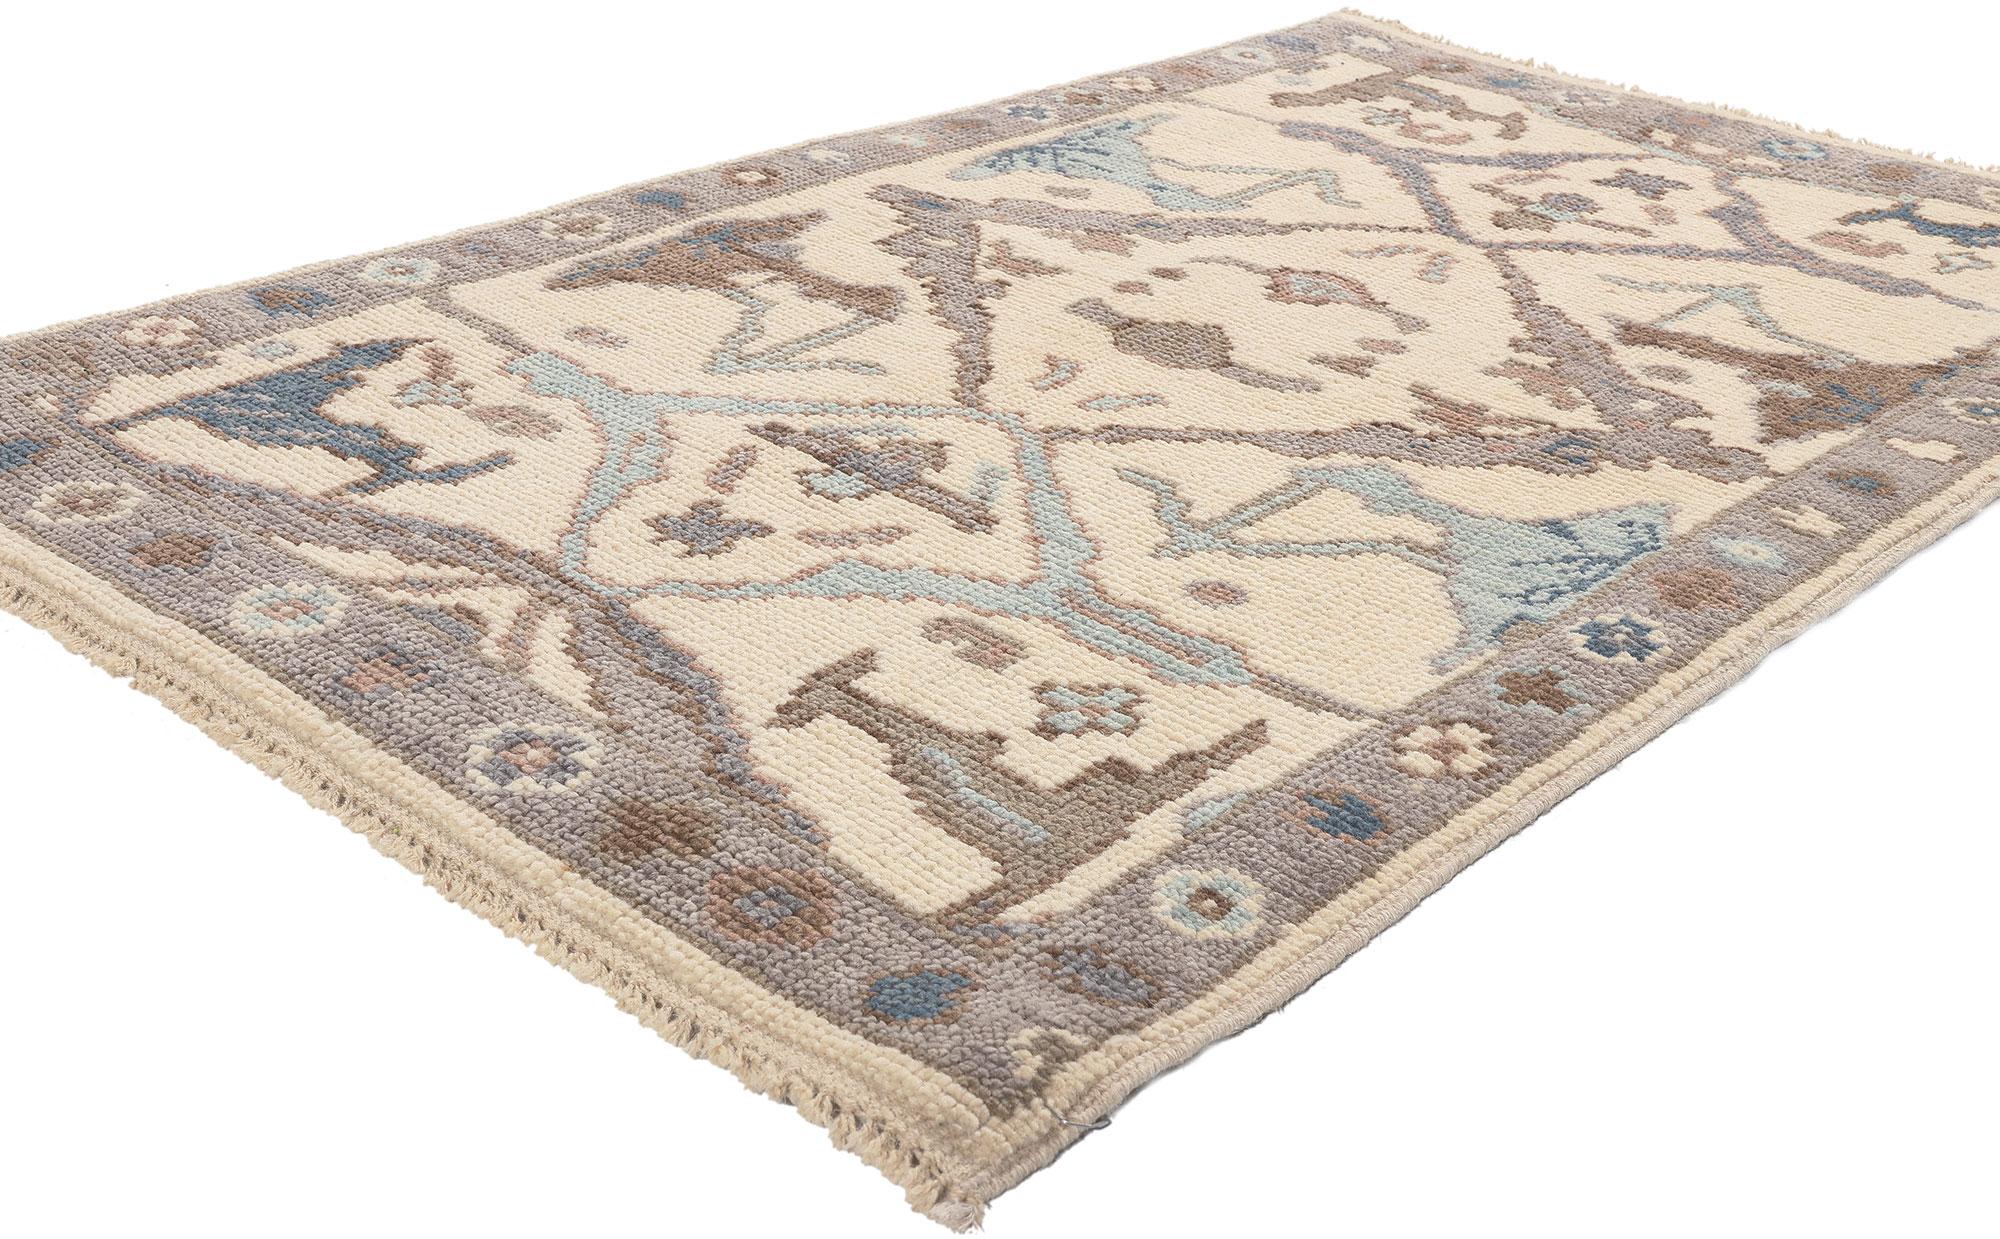 80998 Modern Earthy Oushak Rug, 03'05 x 05'0. 
Emanating timeless style with incredible detail and texture, this hand knotted wool modern Oushak rug is the answer to upscale design furnishings, whether generously or gingerly appointed. The